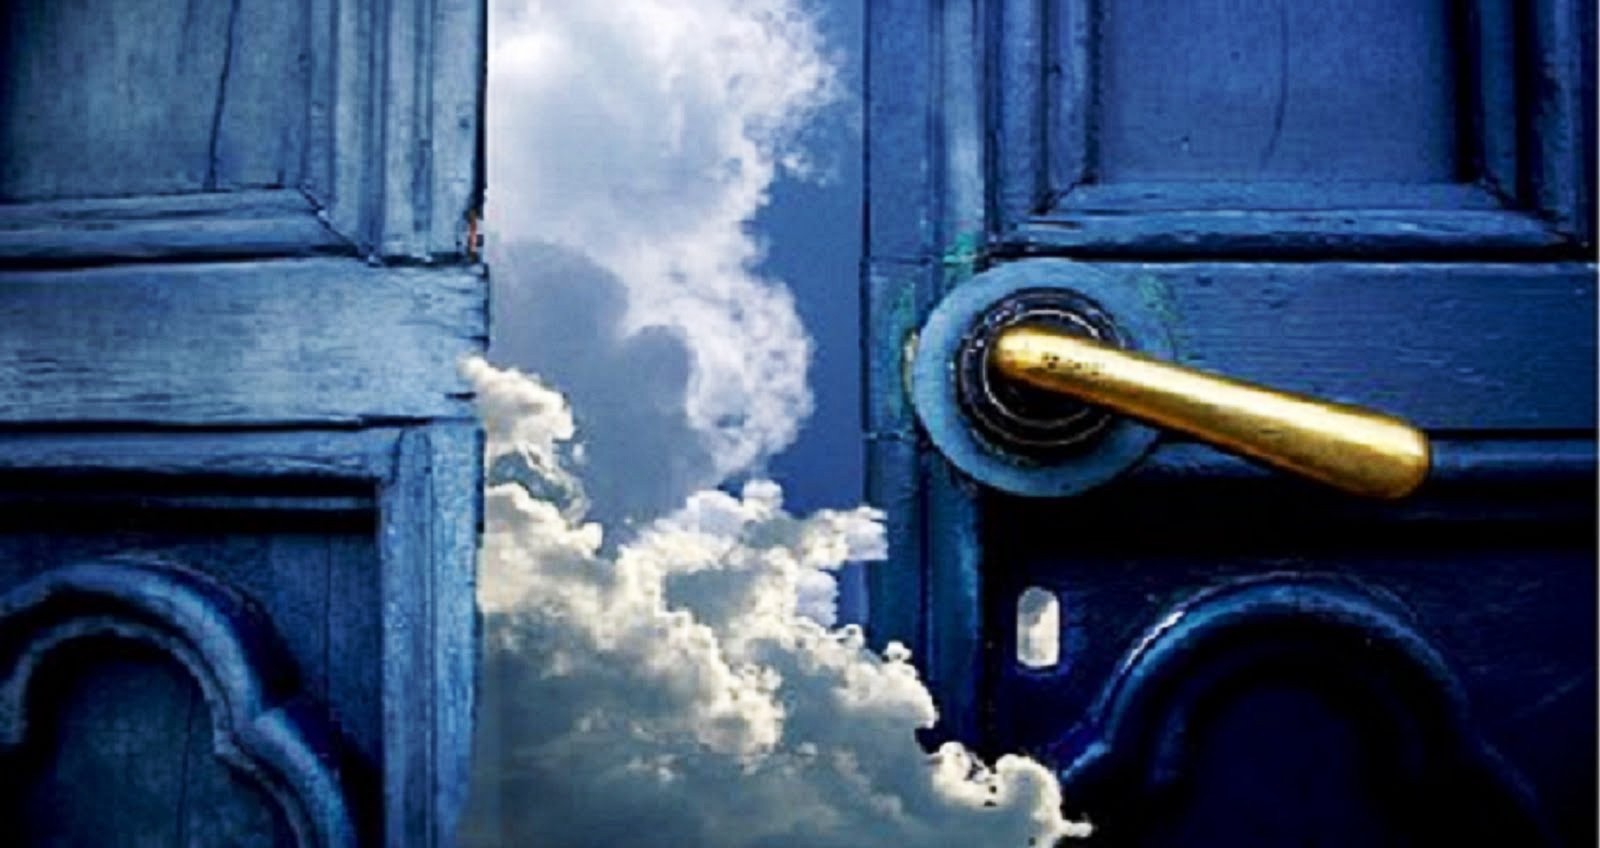 Open blue door with blue sky filled with clouds on the other side.